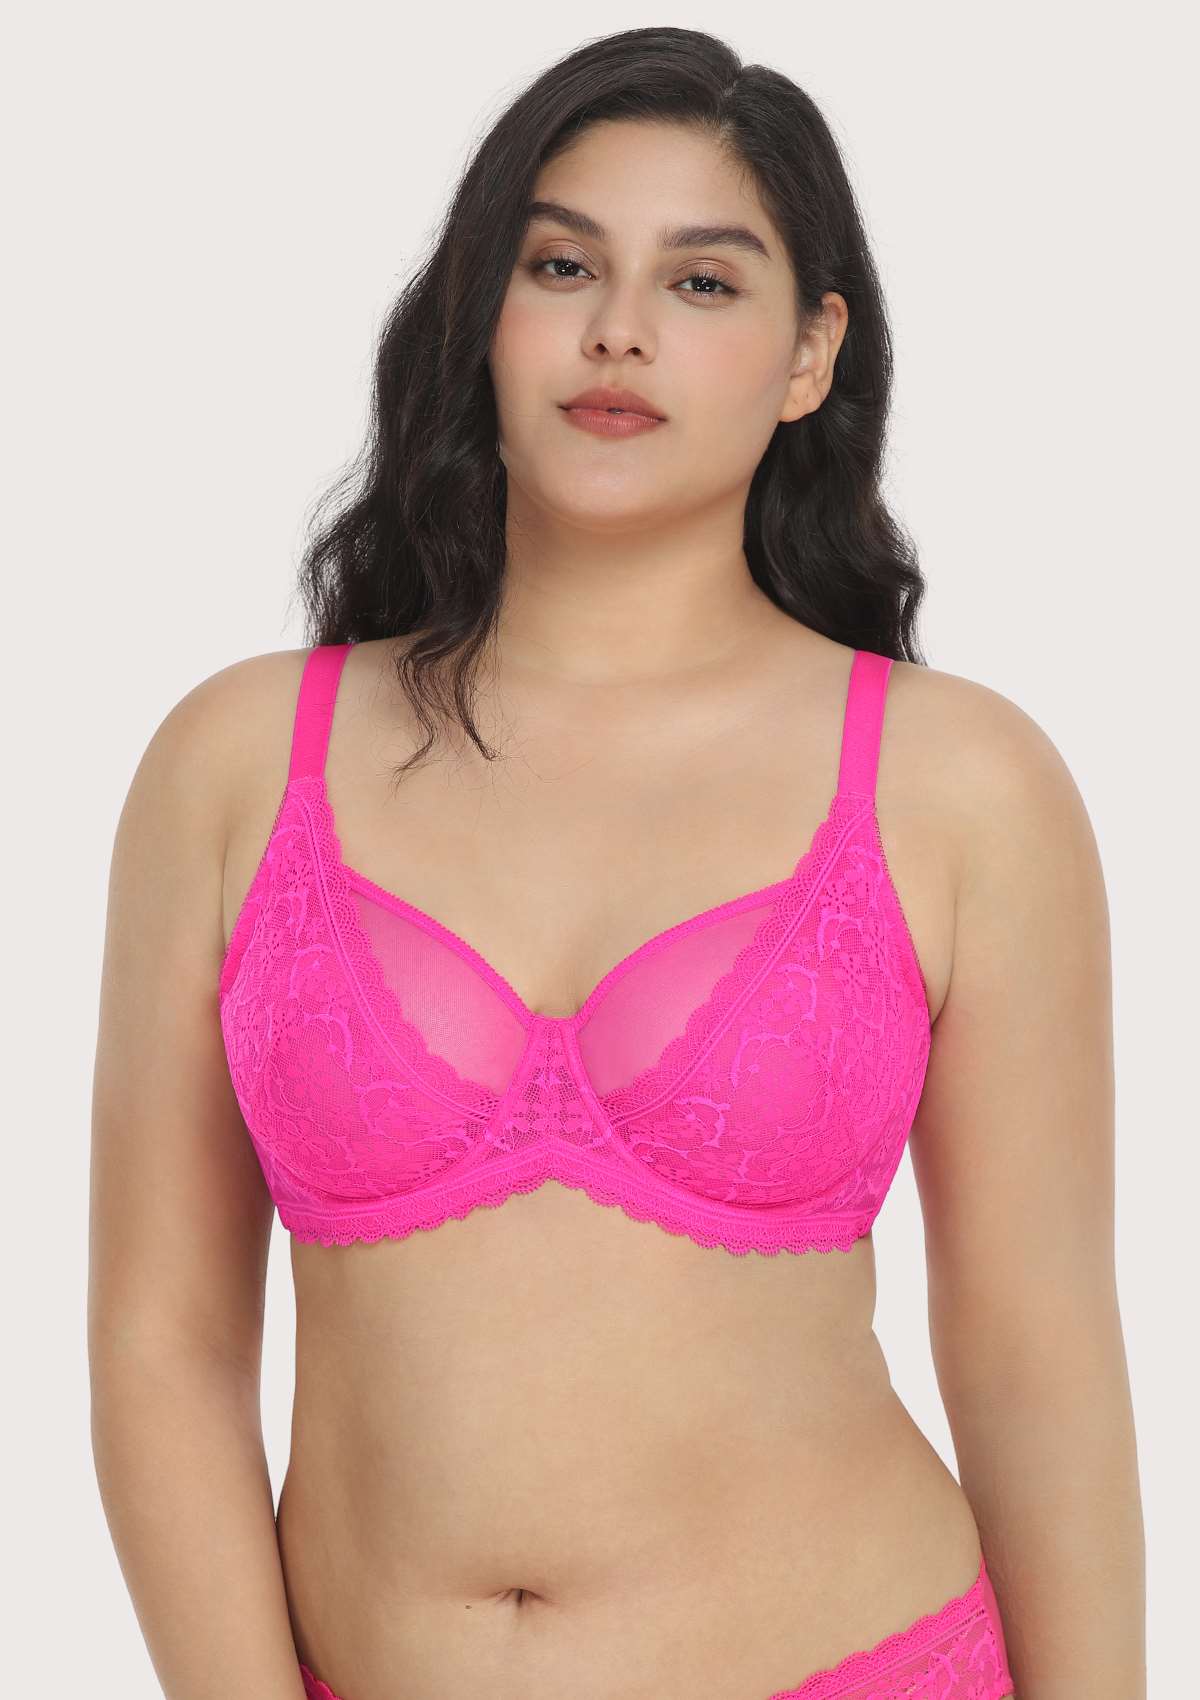 HSIA Anemone Lace Unlined Bra: Supportive, Lightweight Bra - Hot Pink / 34 / C